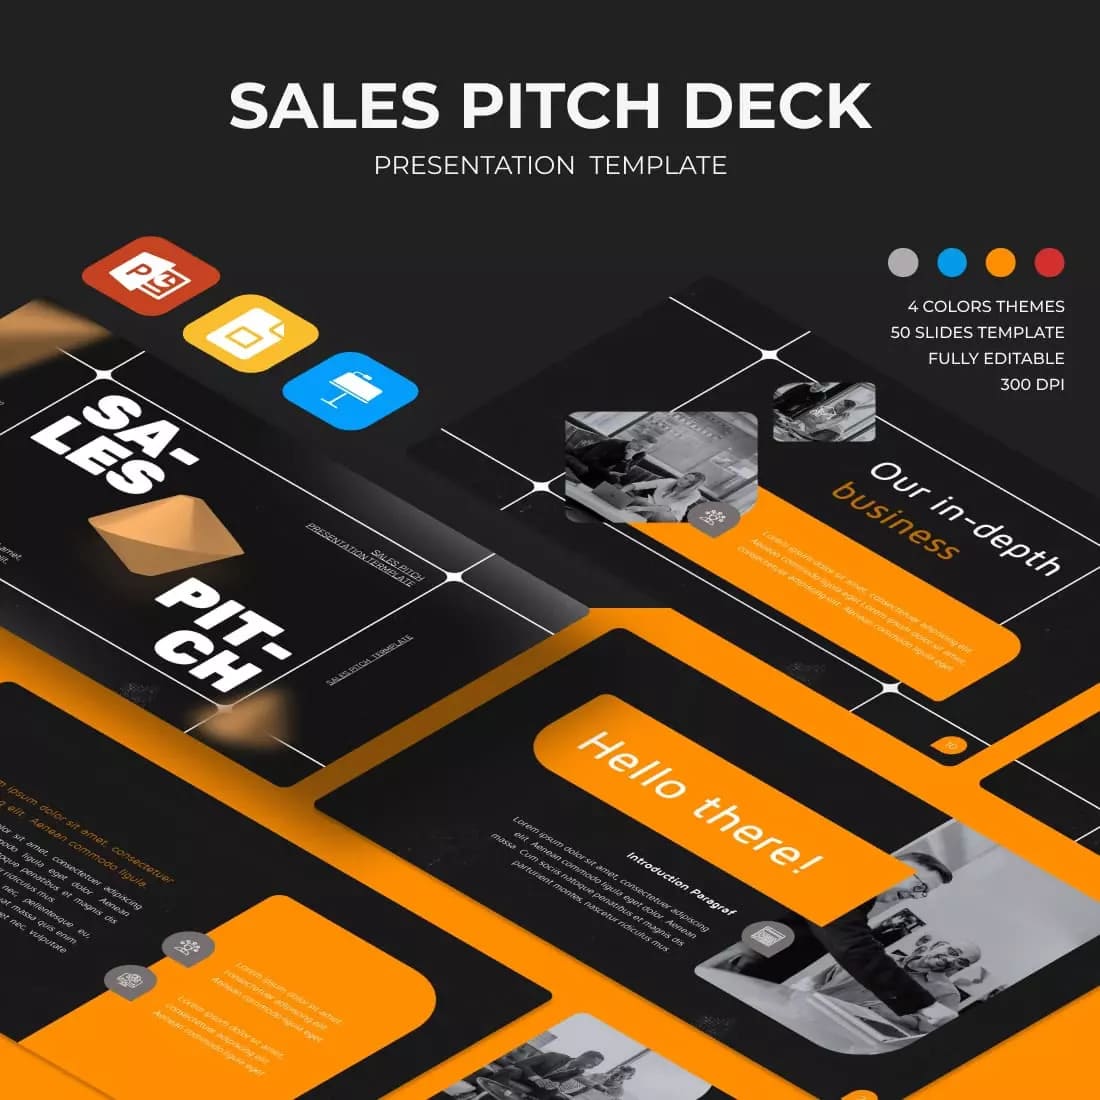 Sales Pitch Deck Presentation Template Preview image.